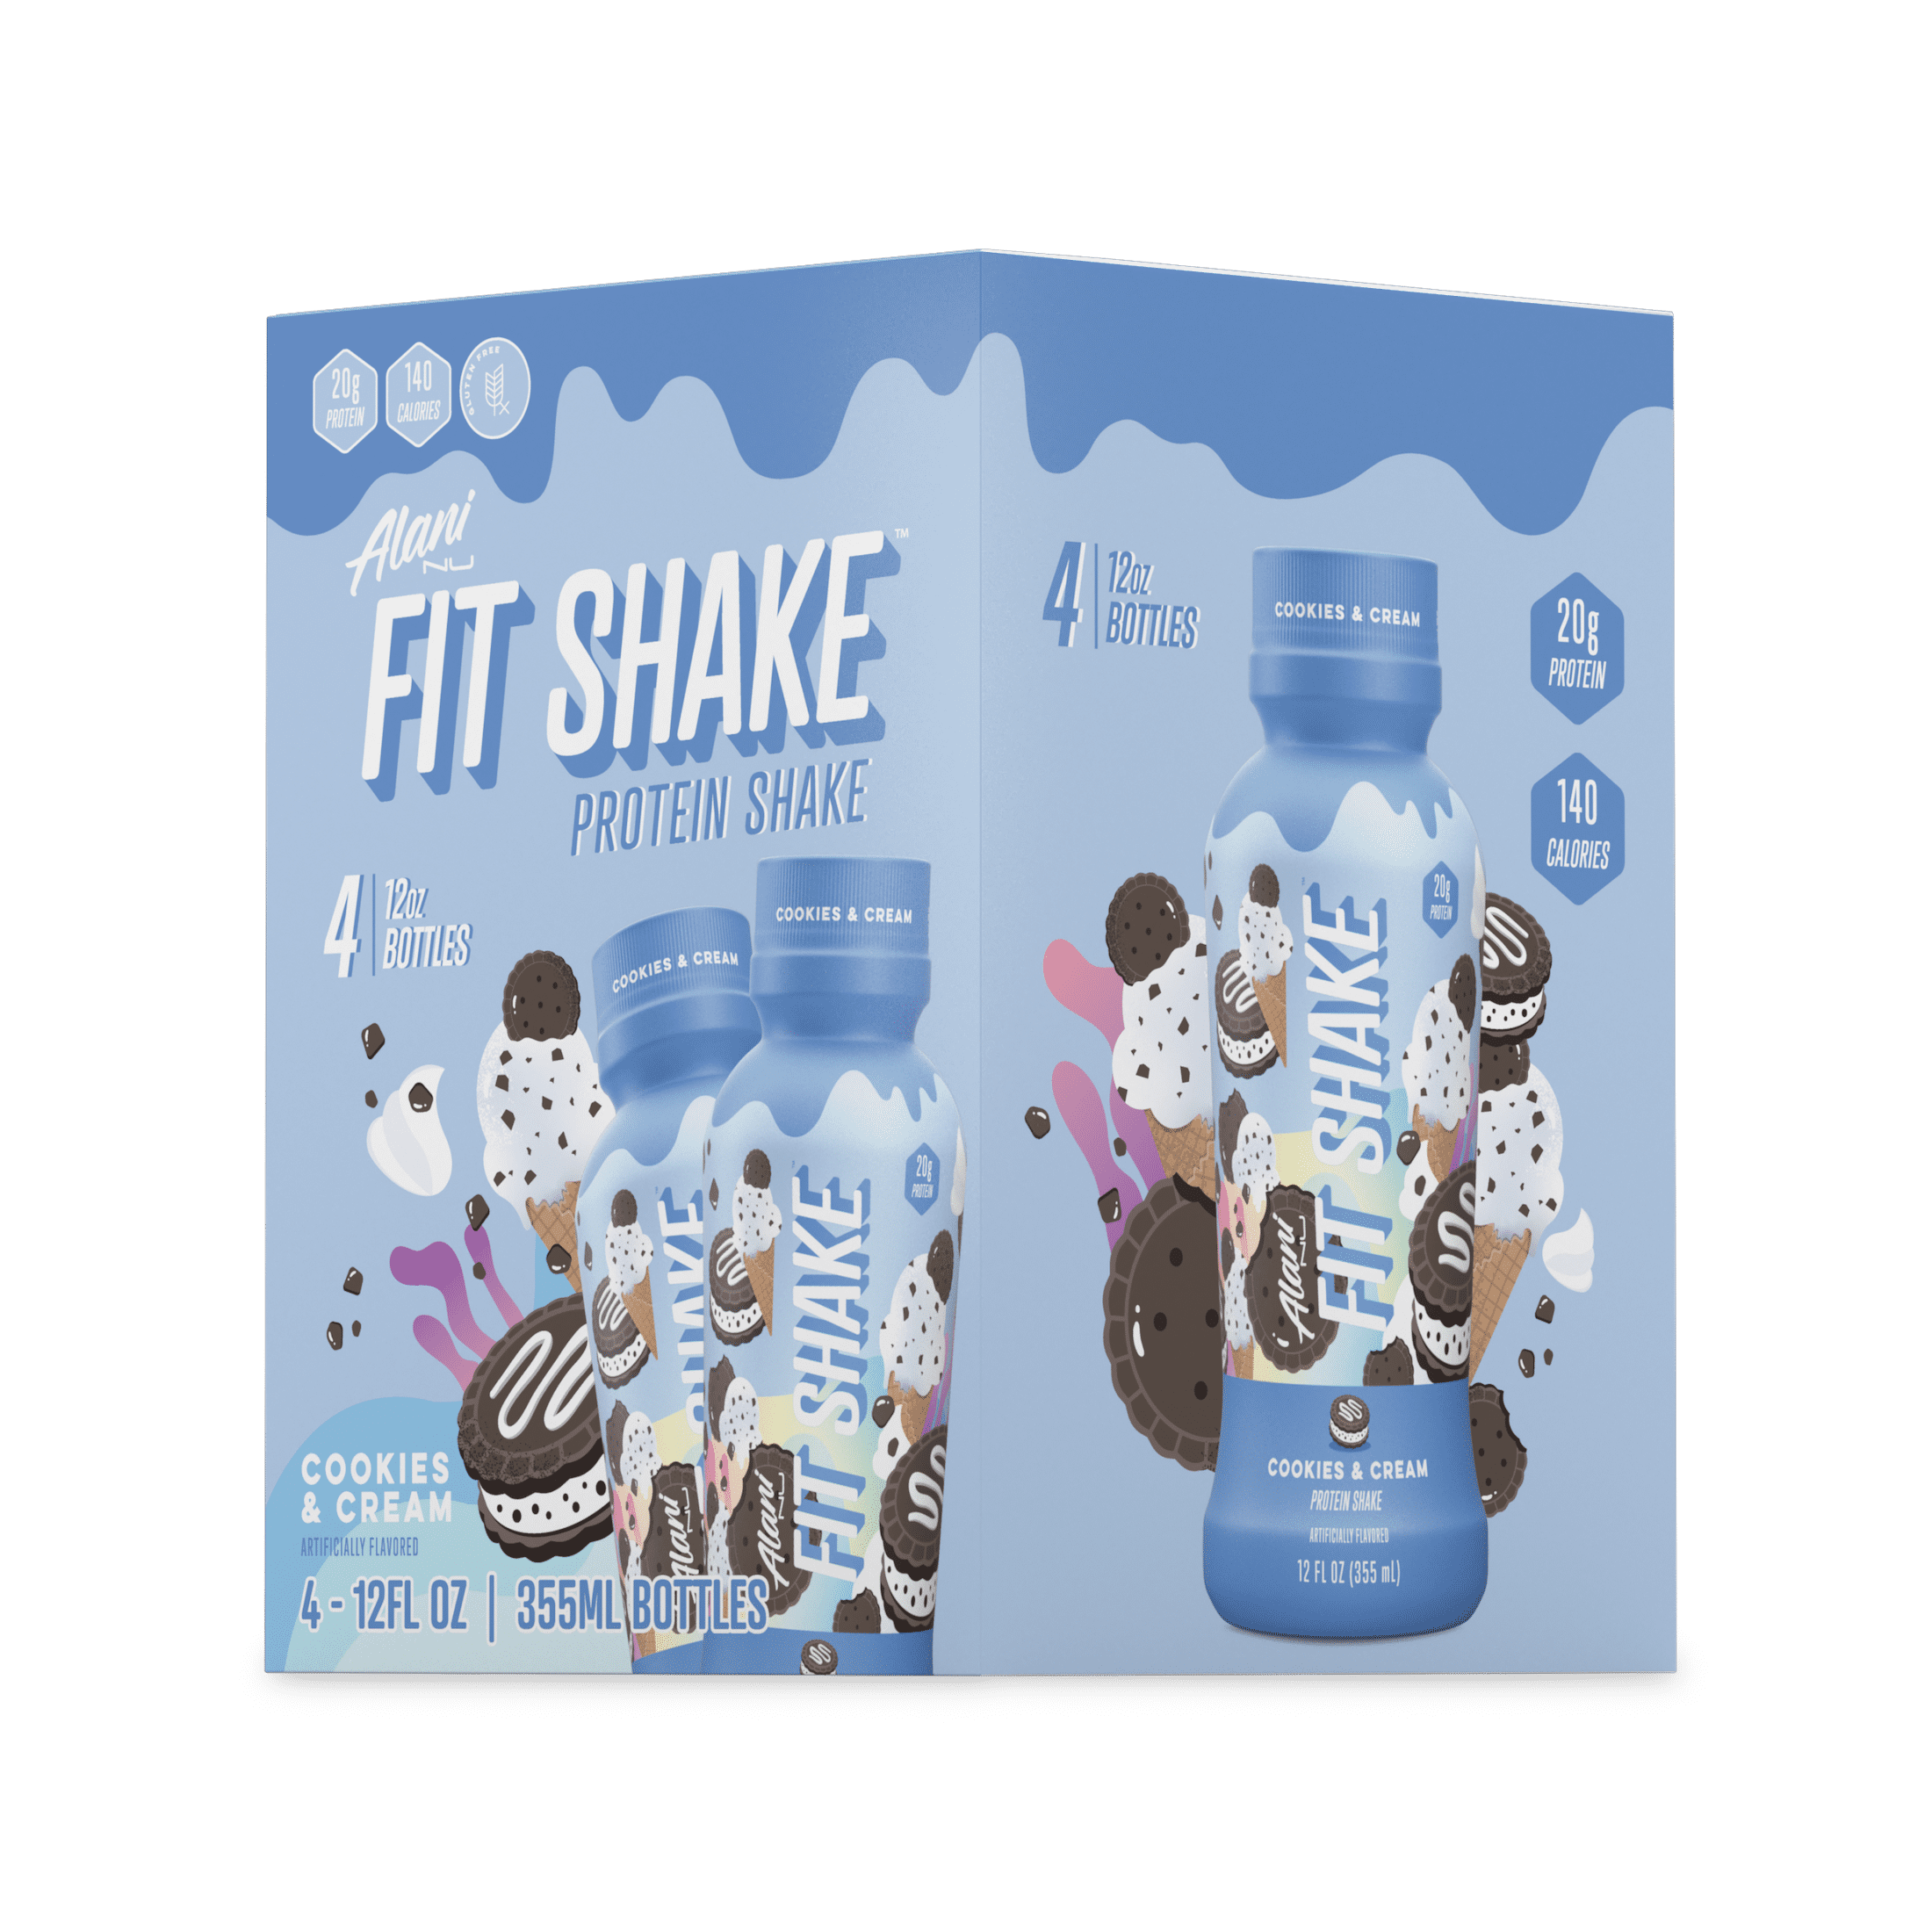 NEW FIND‼️These delicious Alani protein shakes are silky smooth & swee, Protein  Shake